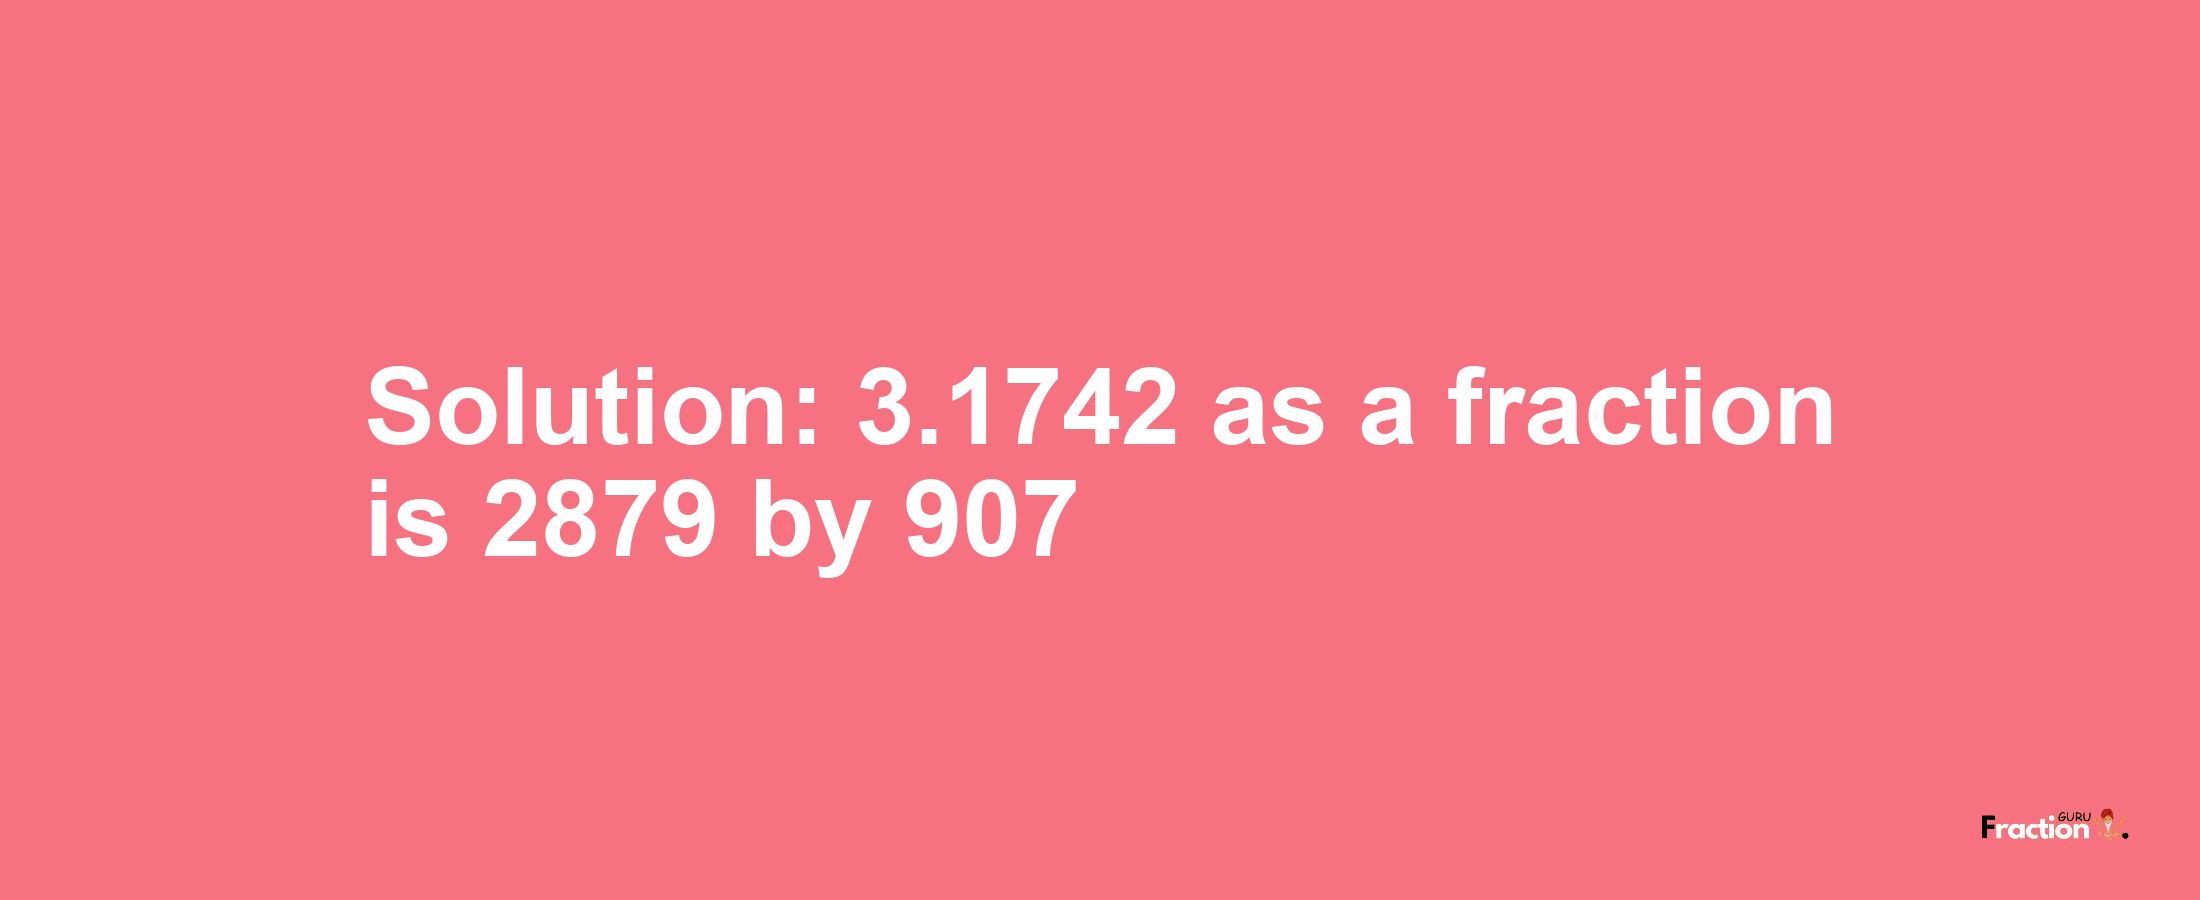 Solution:3.1742 as a fraction is 2879/907